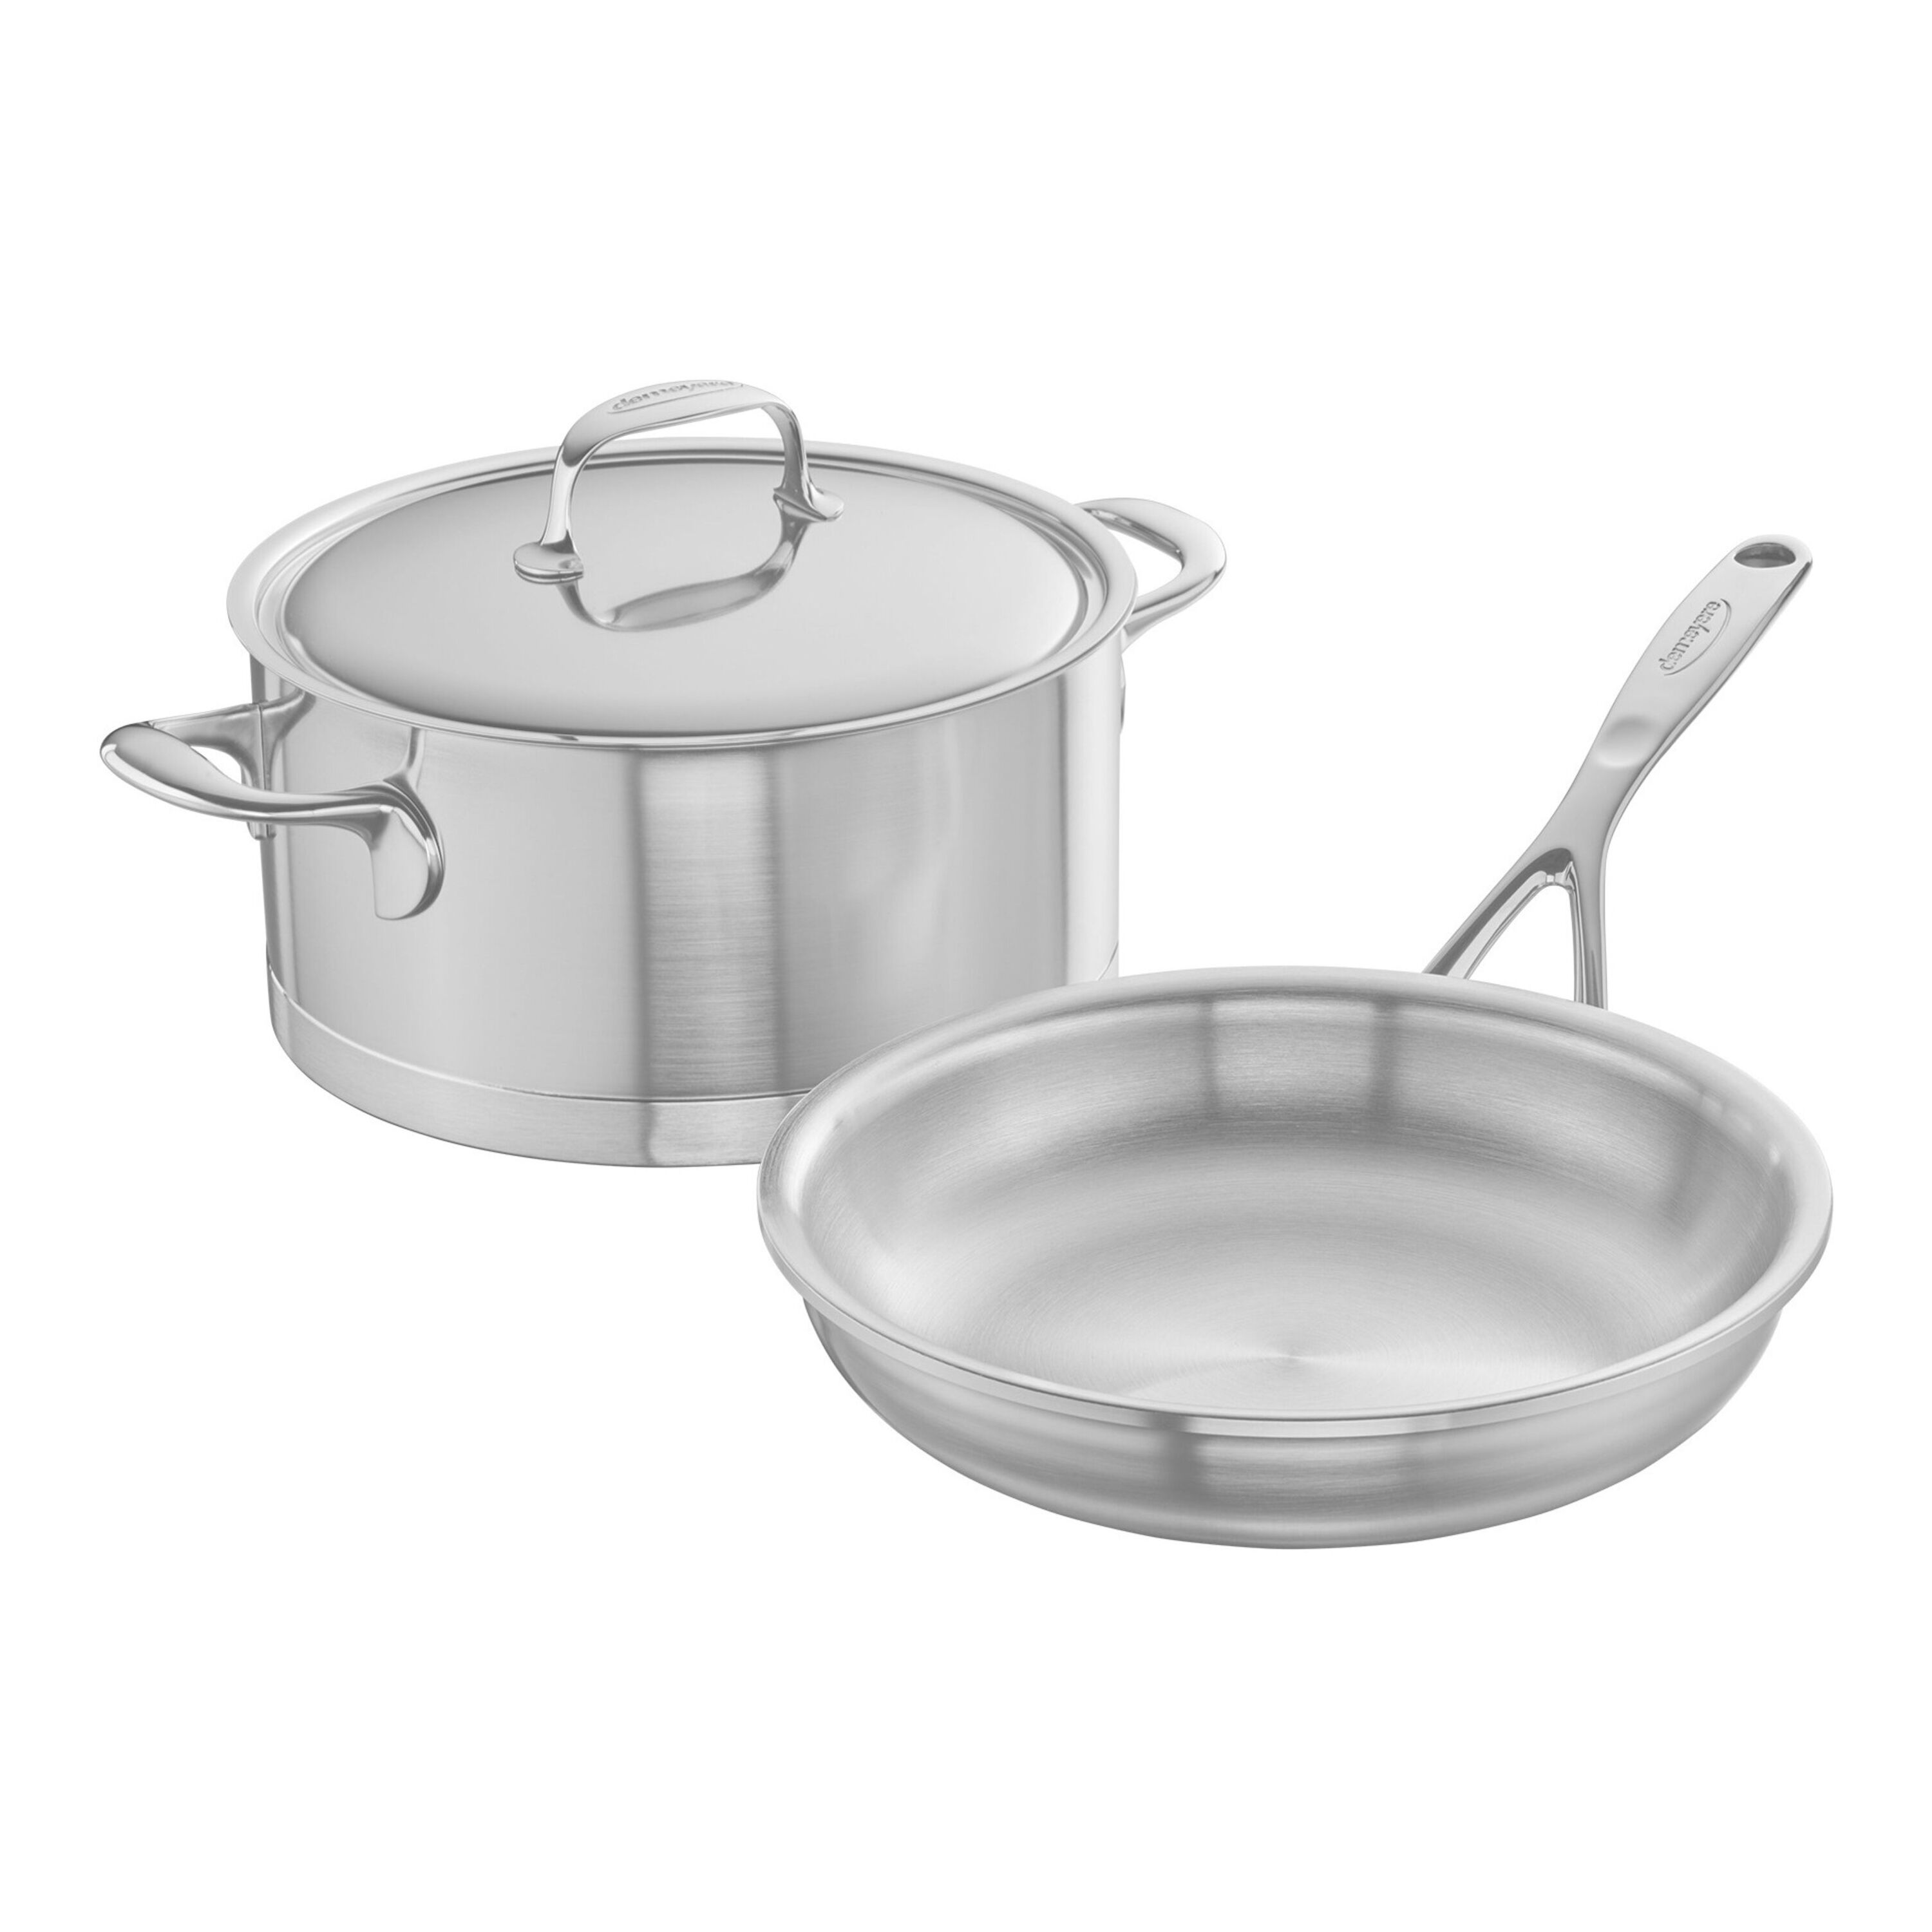 Demeyere Commercial-Quality 5-Ply Stainless Steel Cookware Set, 9-Piece